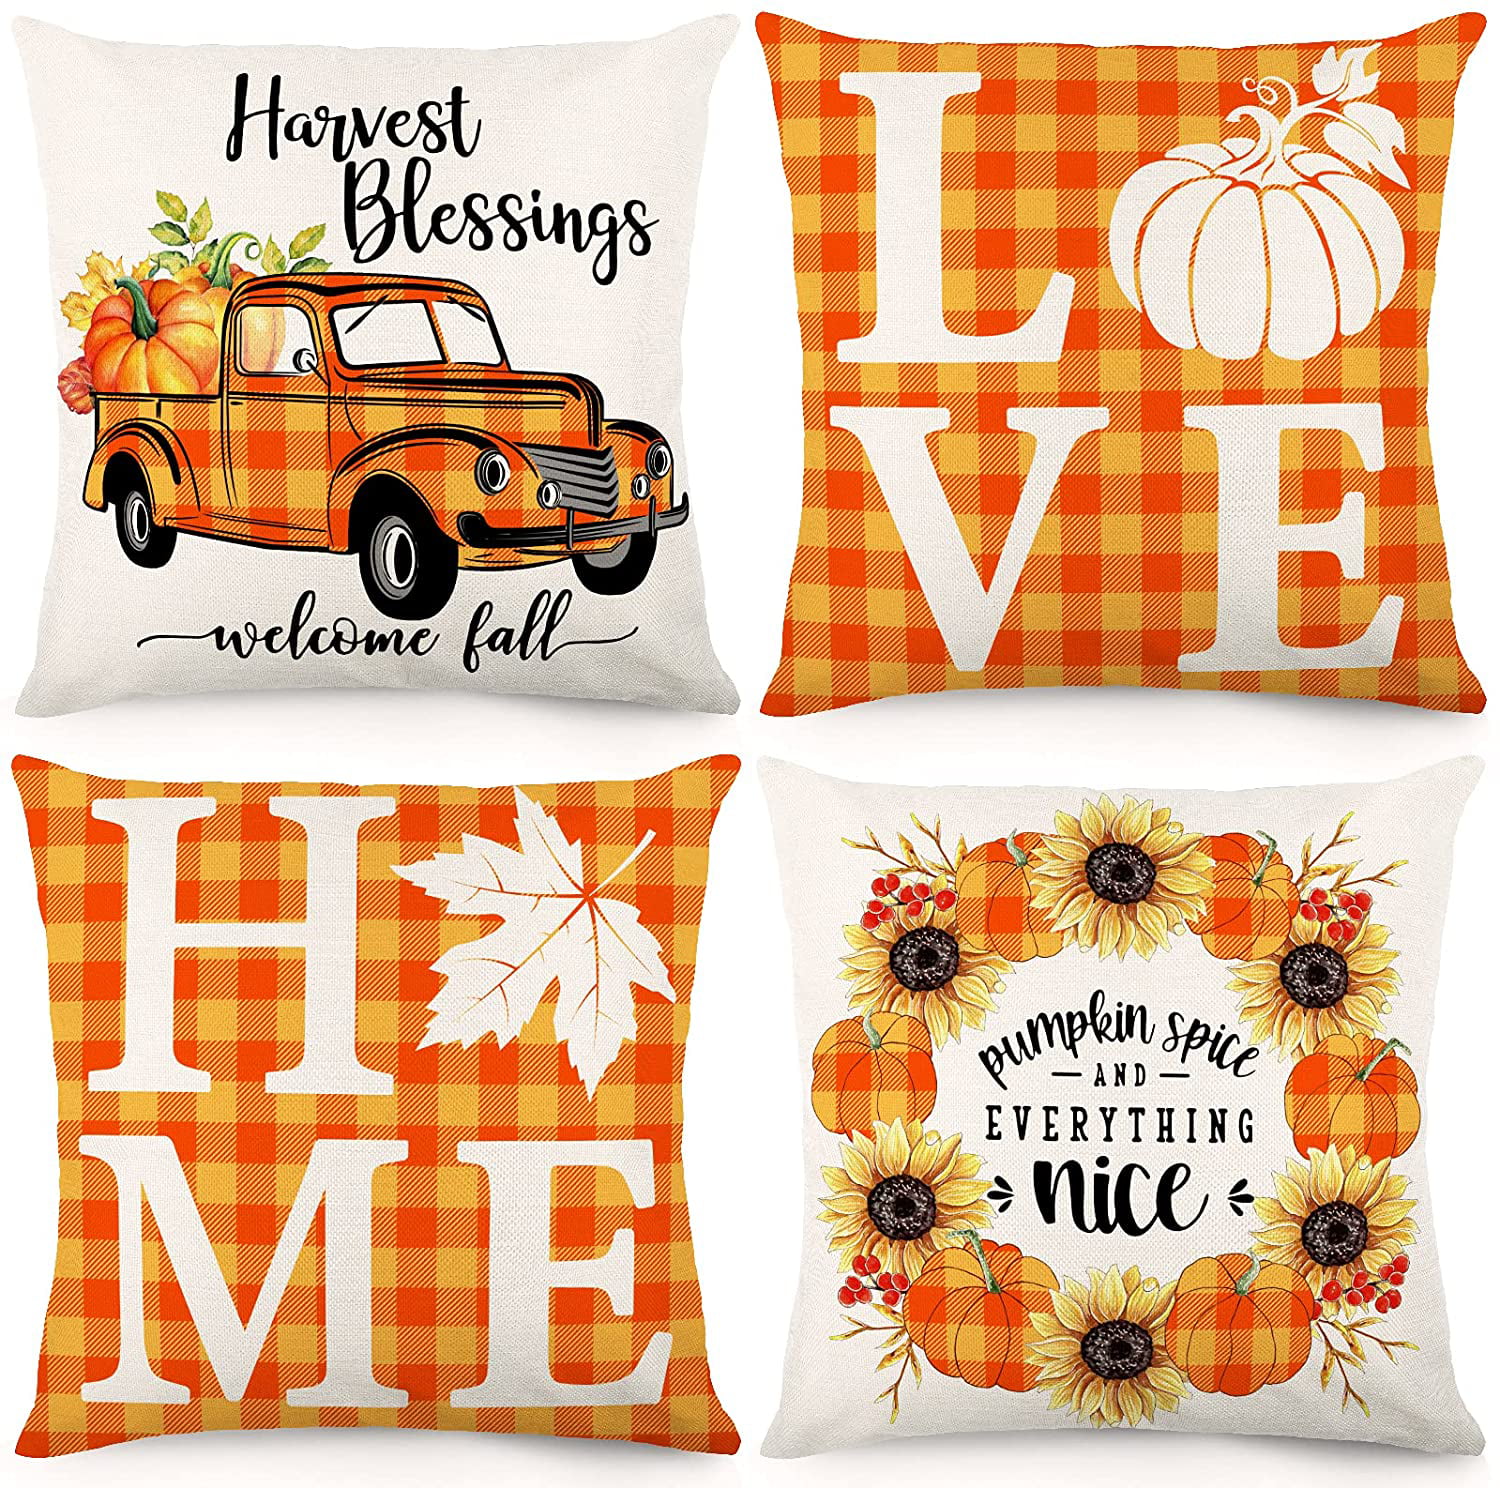 Autumn Thanksgiving Pillow Covers 18×18 Inch for Home Decoration，Hello Fall Words Cushion Pillow Cases Yellow Orange Flowers Holiday Throw Pillow Covers Set of 2 for Couch Sofa Bed Chair Decor 